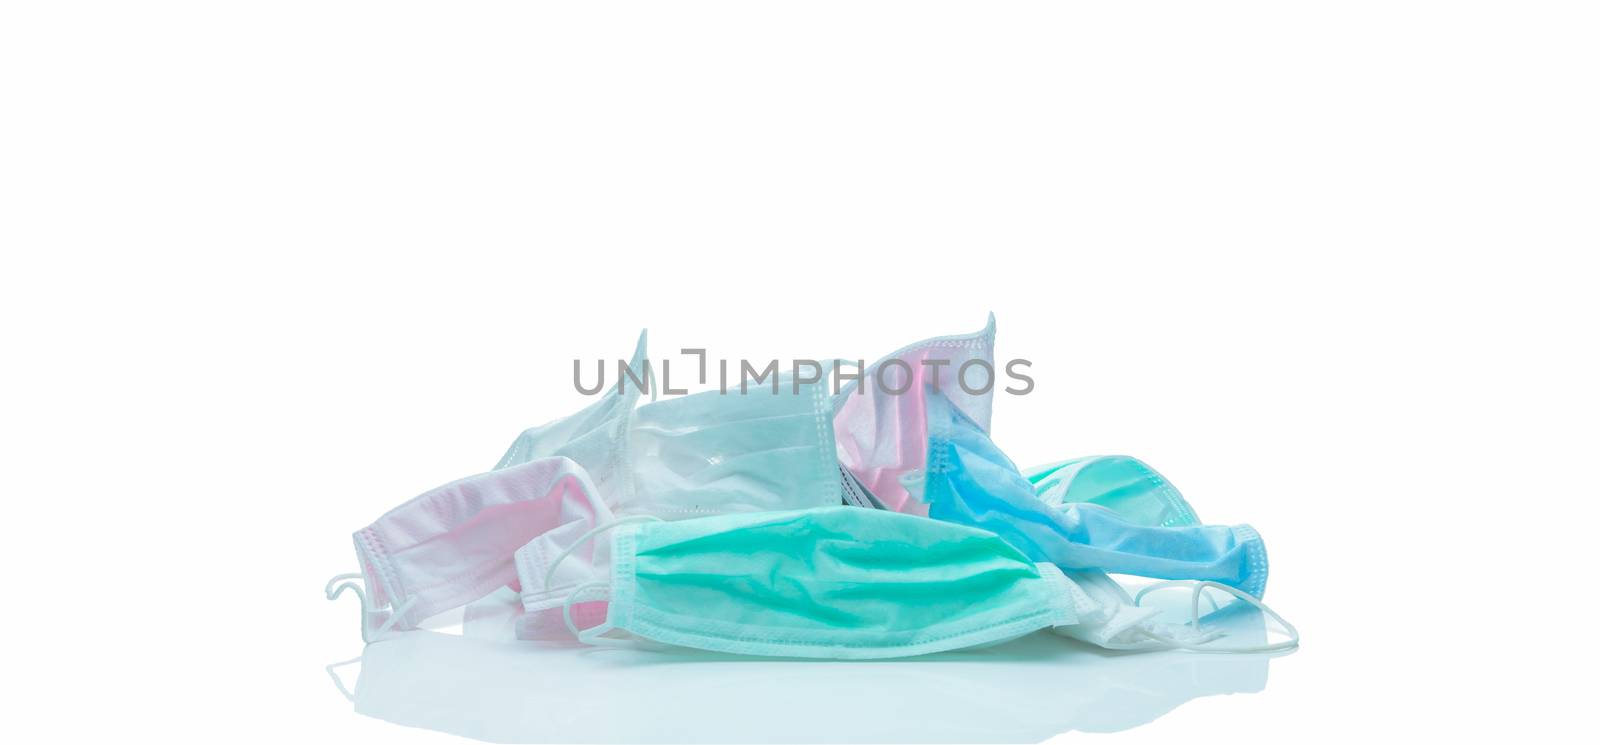 Pile of used surgical face mask isolated on white background. Me by Fahroni